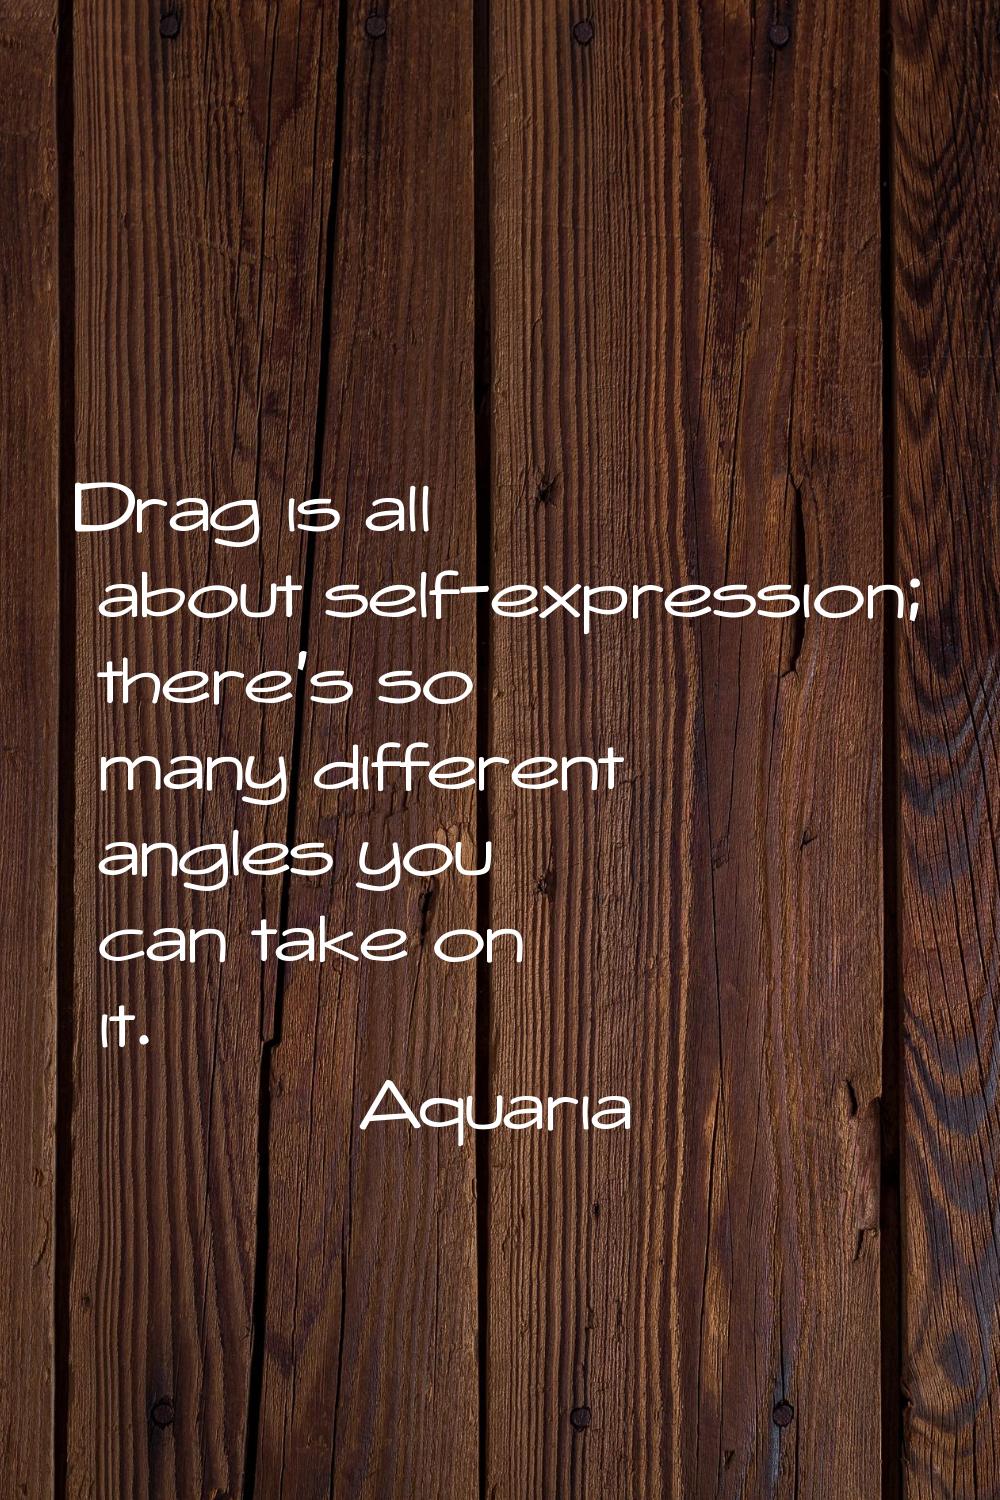 Drag is all about self-expression; there's so many different angles you can take on it.